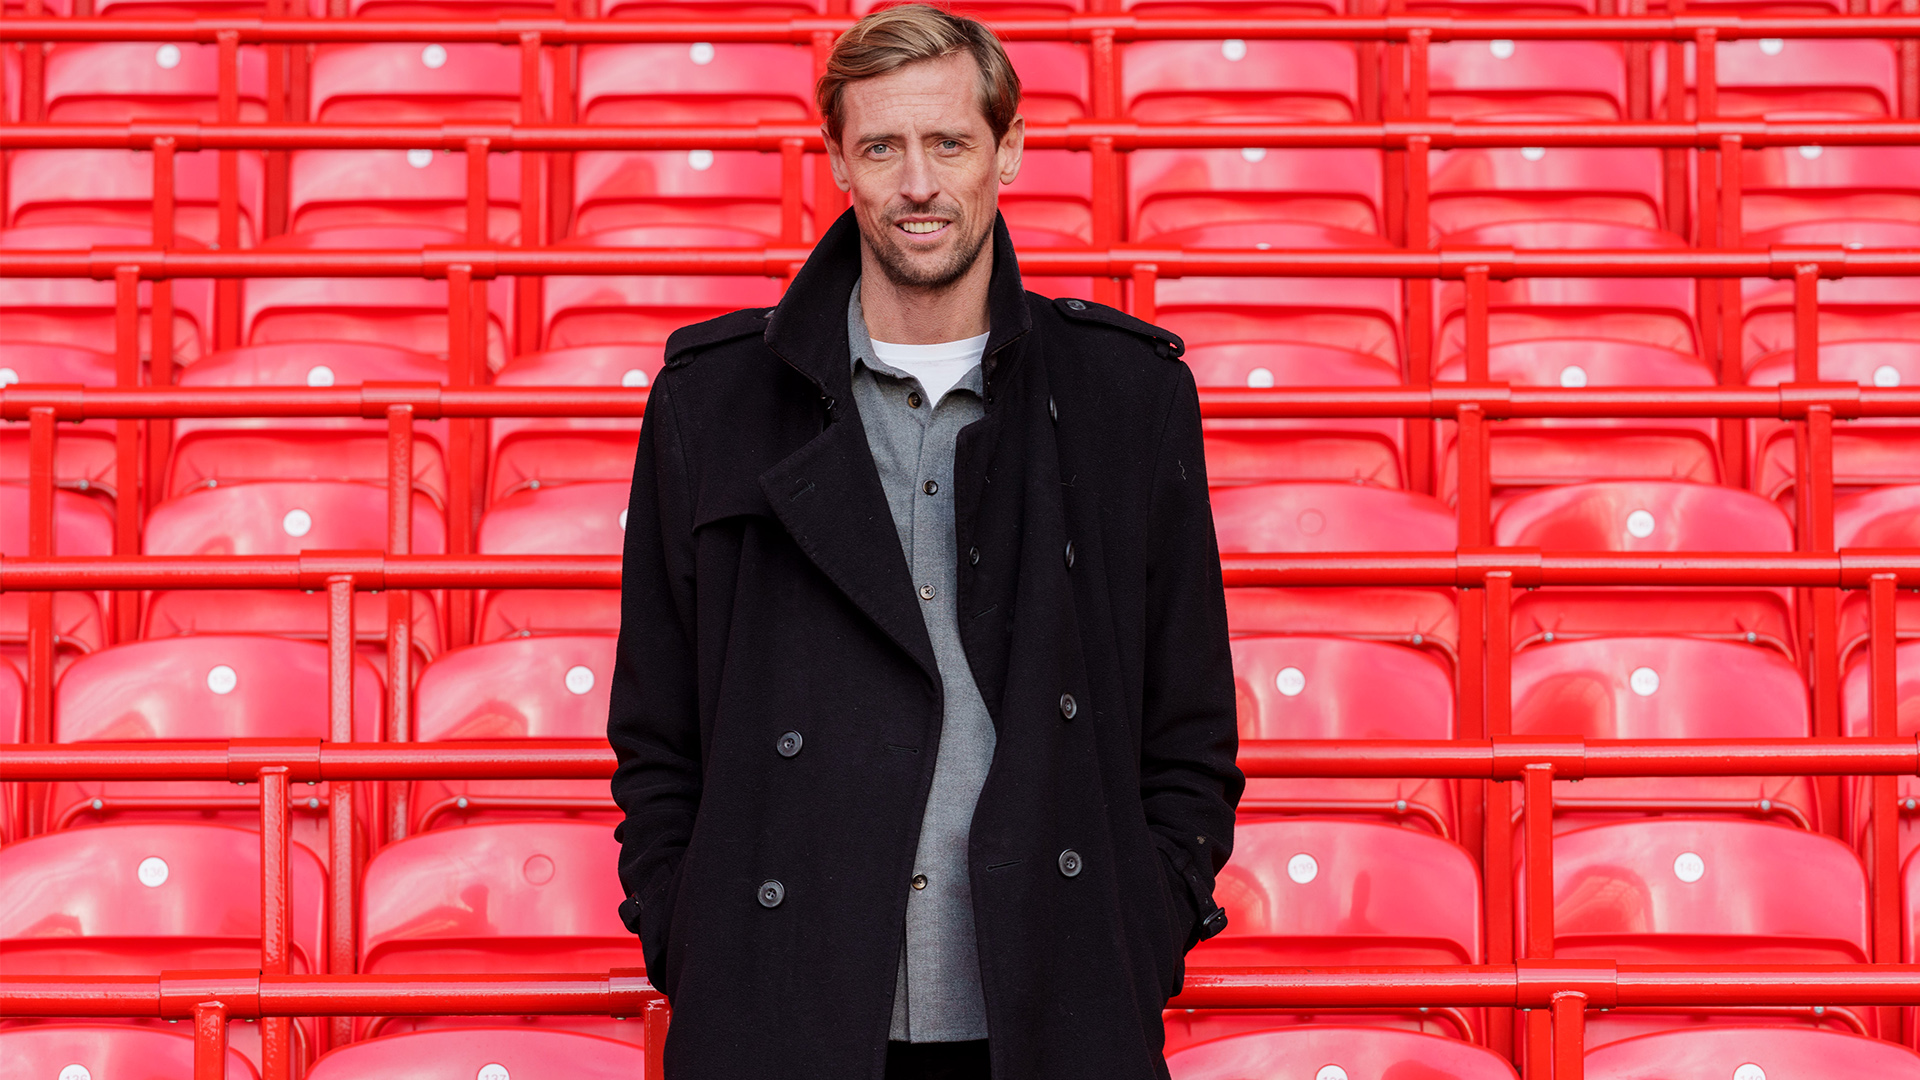 Peter Crouch at Anfield